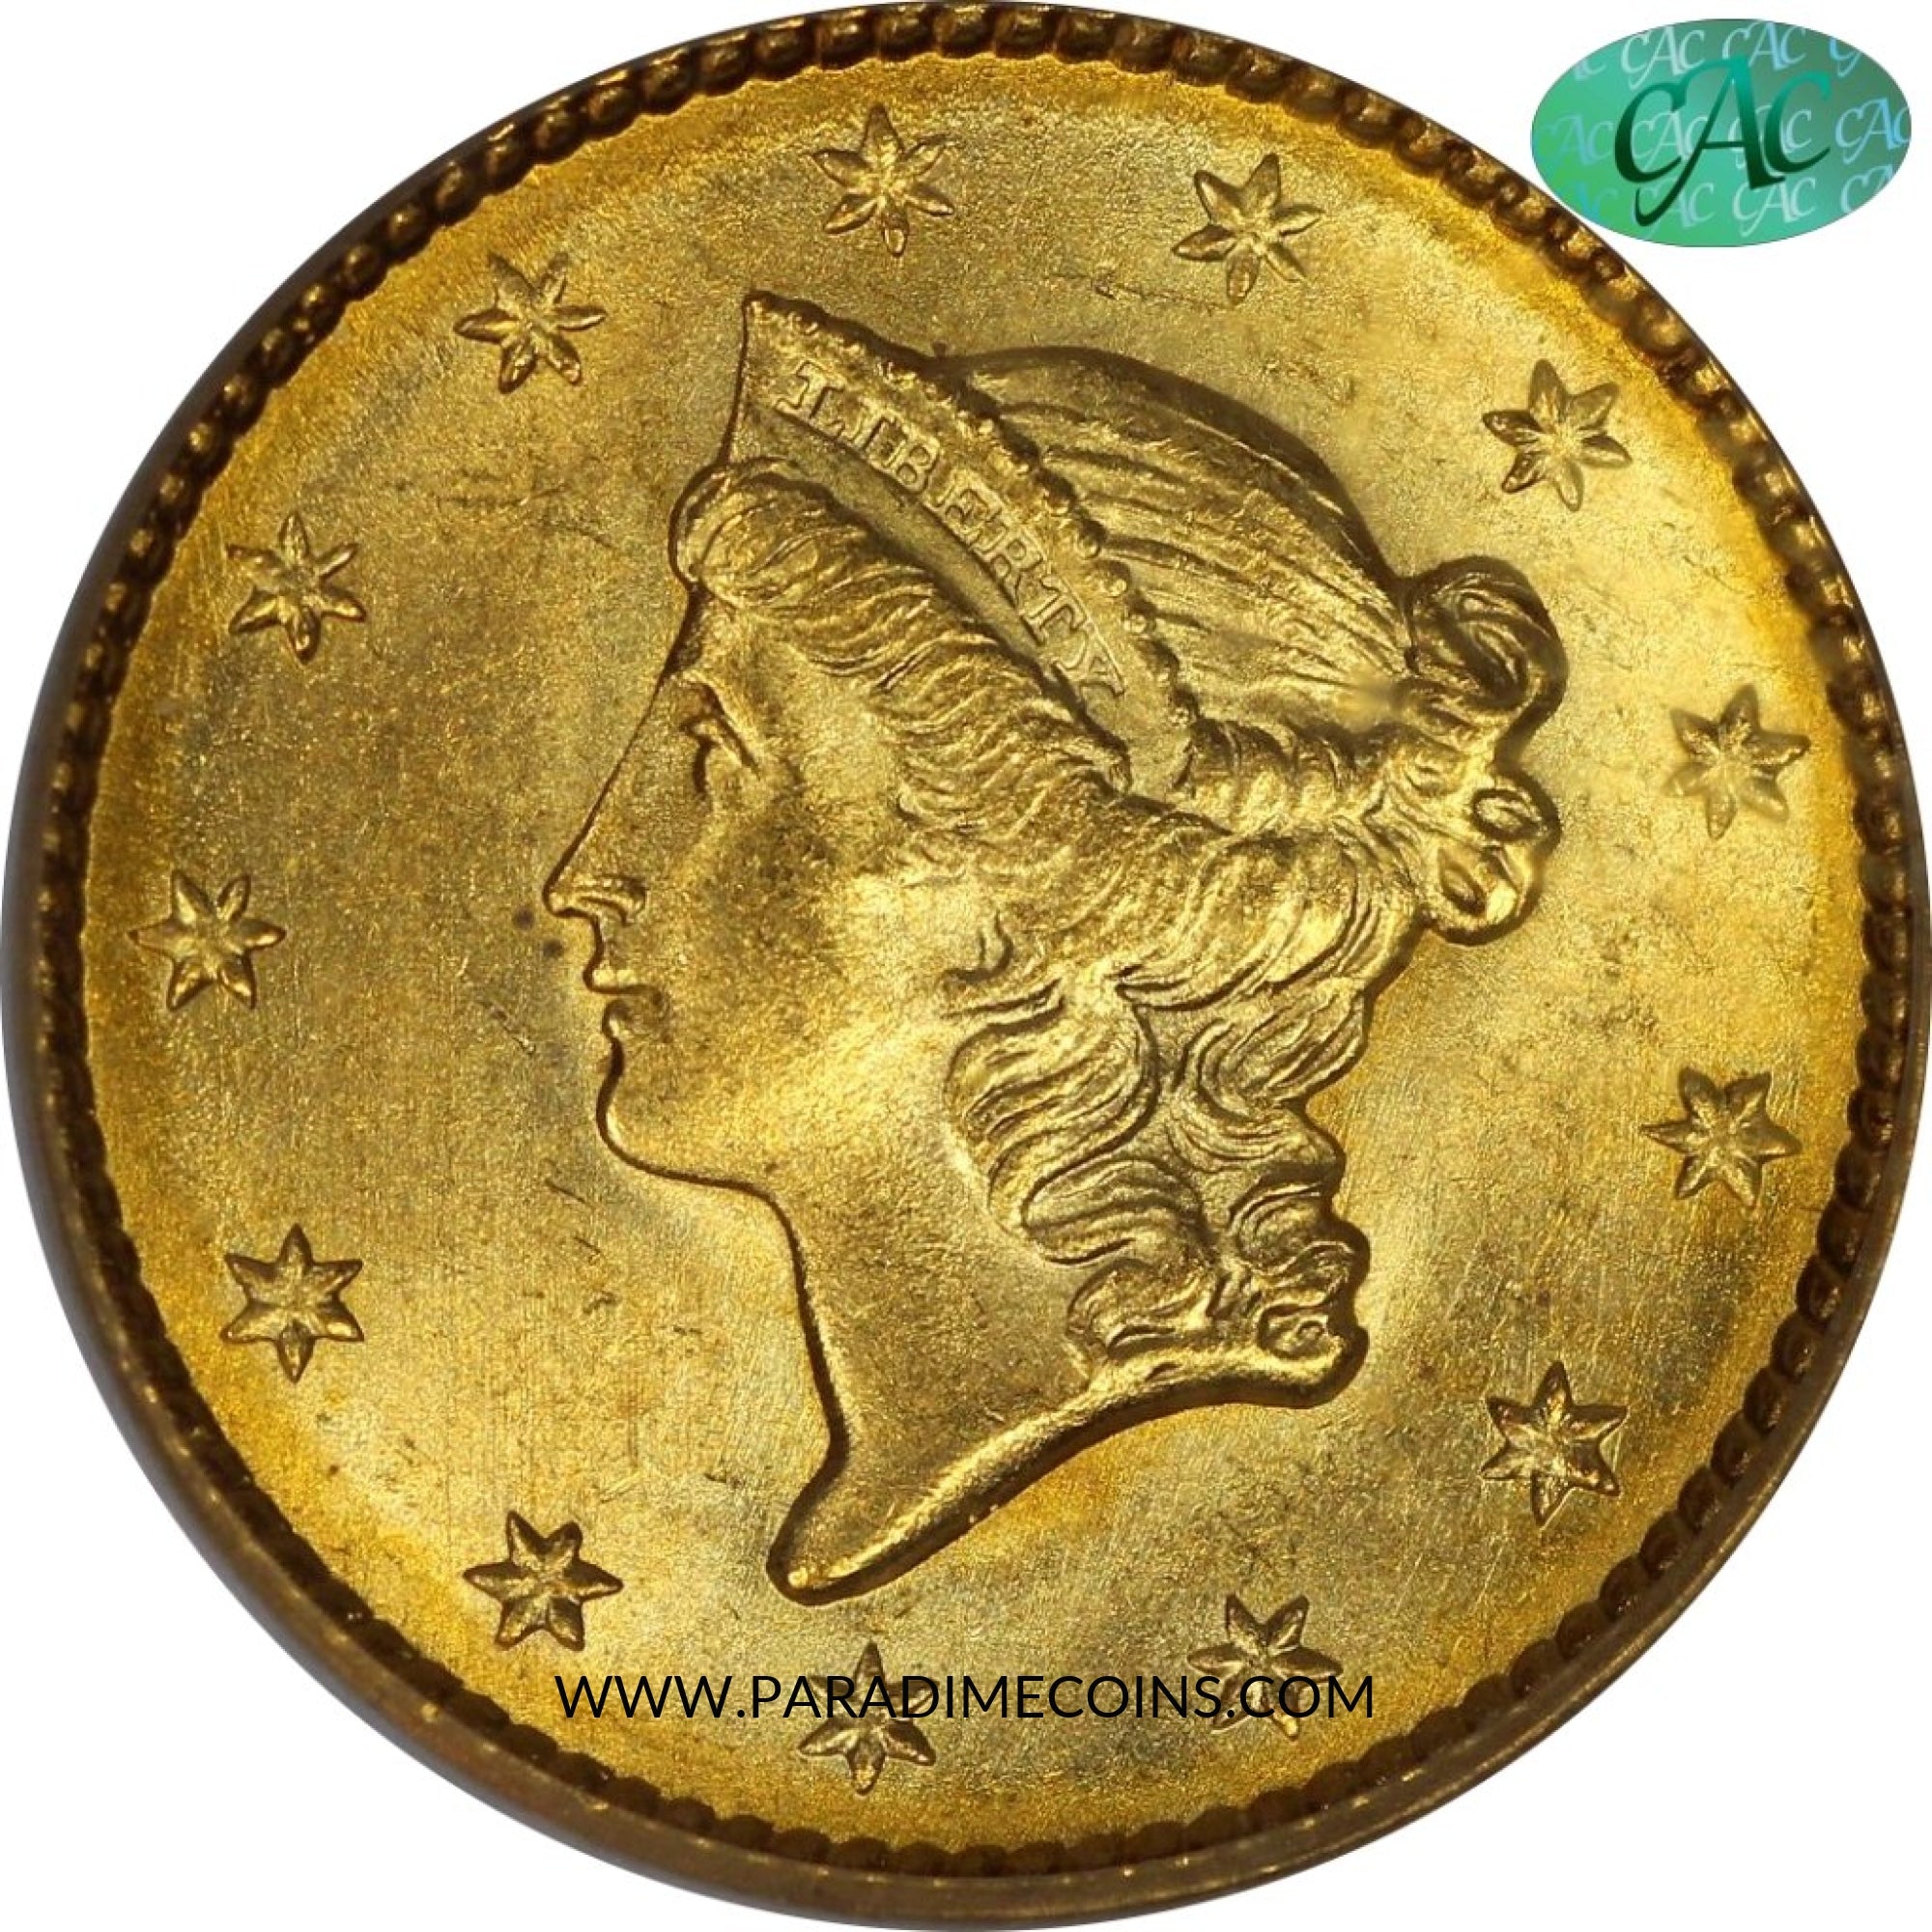 1850 G$1 MS65 PCGS CAC - Paradime Coins | PCGS NGC CACG CAC Rare US Numismatic Coins For Sale